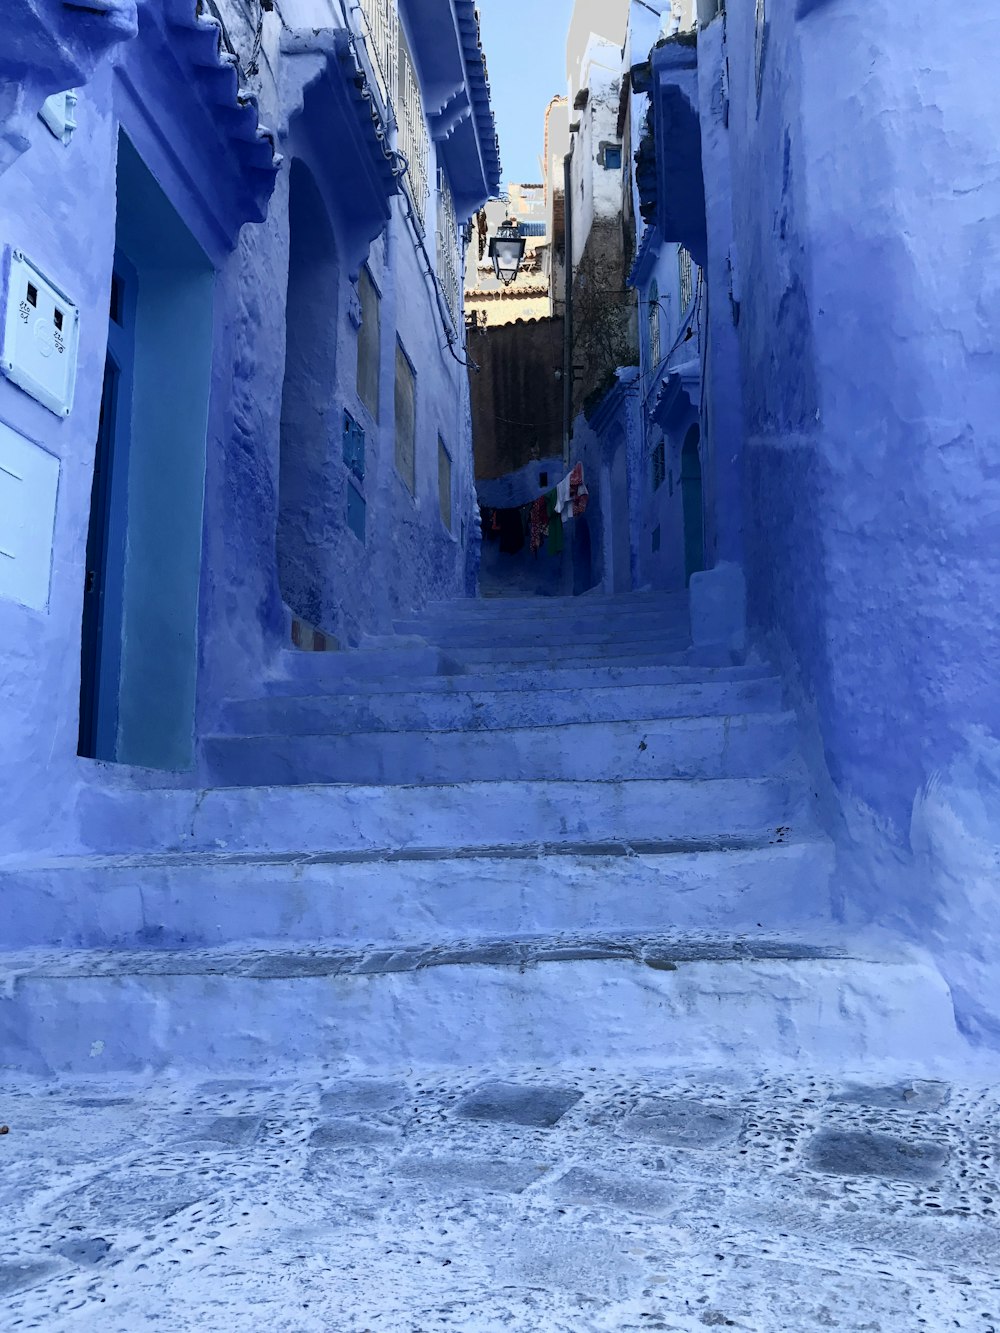 blue painted staircase and buildings